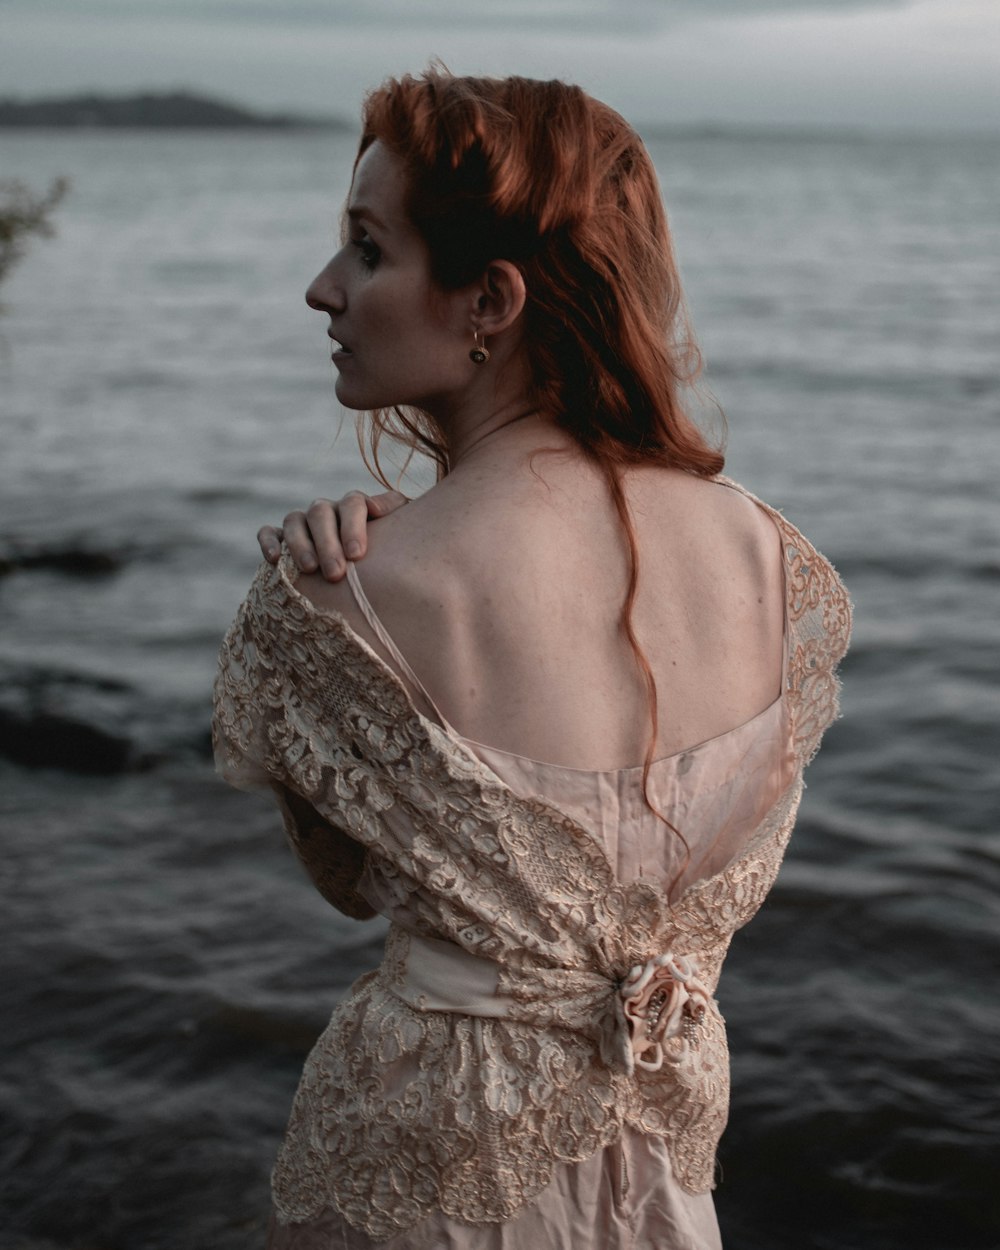 woman in white floral dress standing on sea shore during daytime